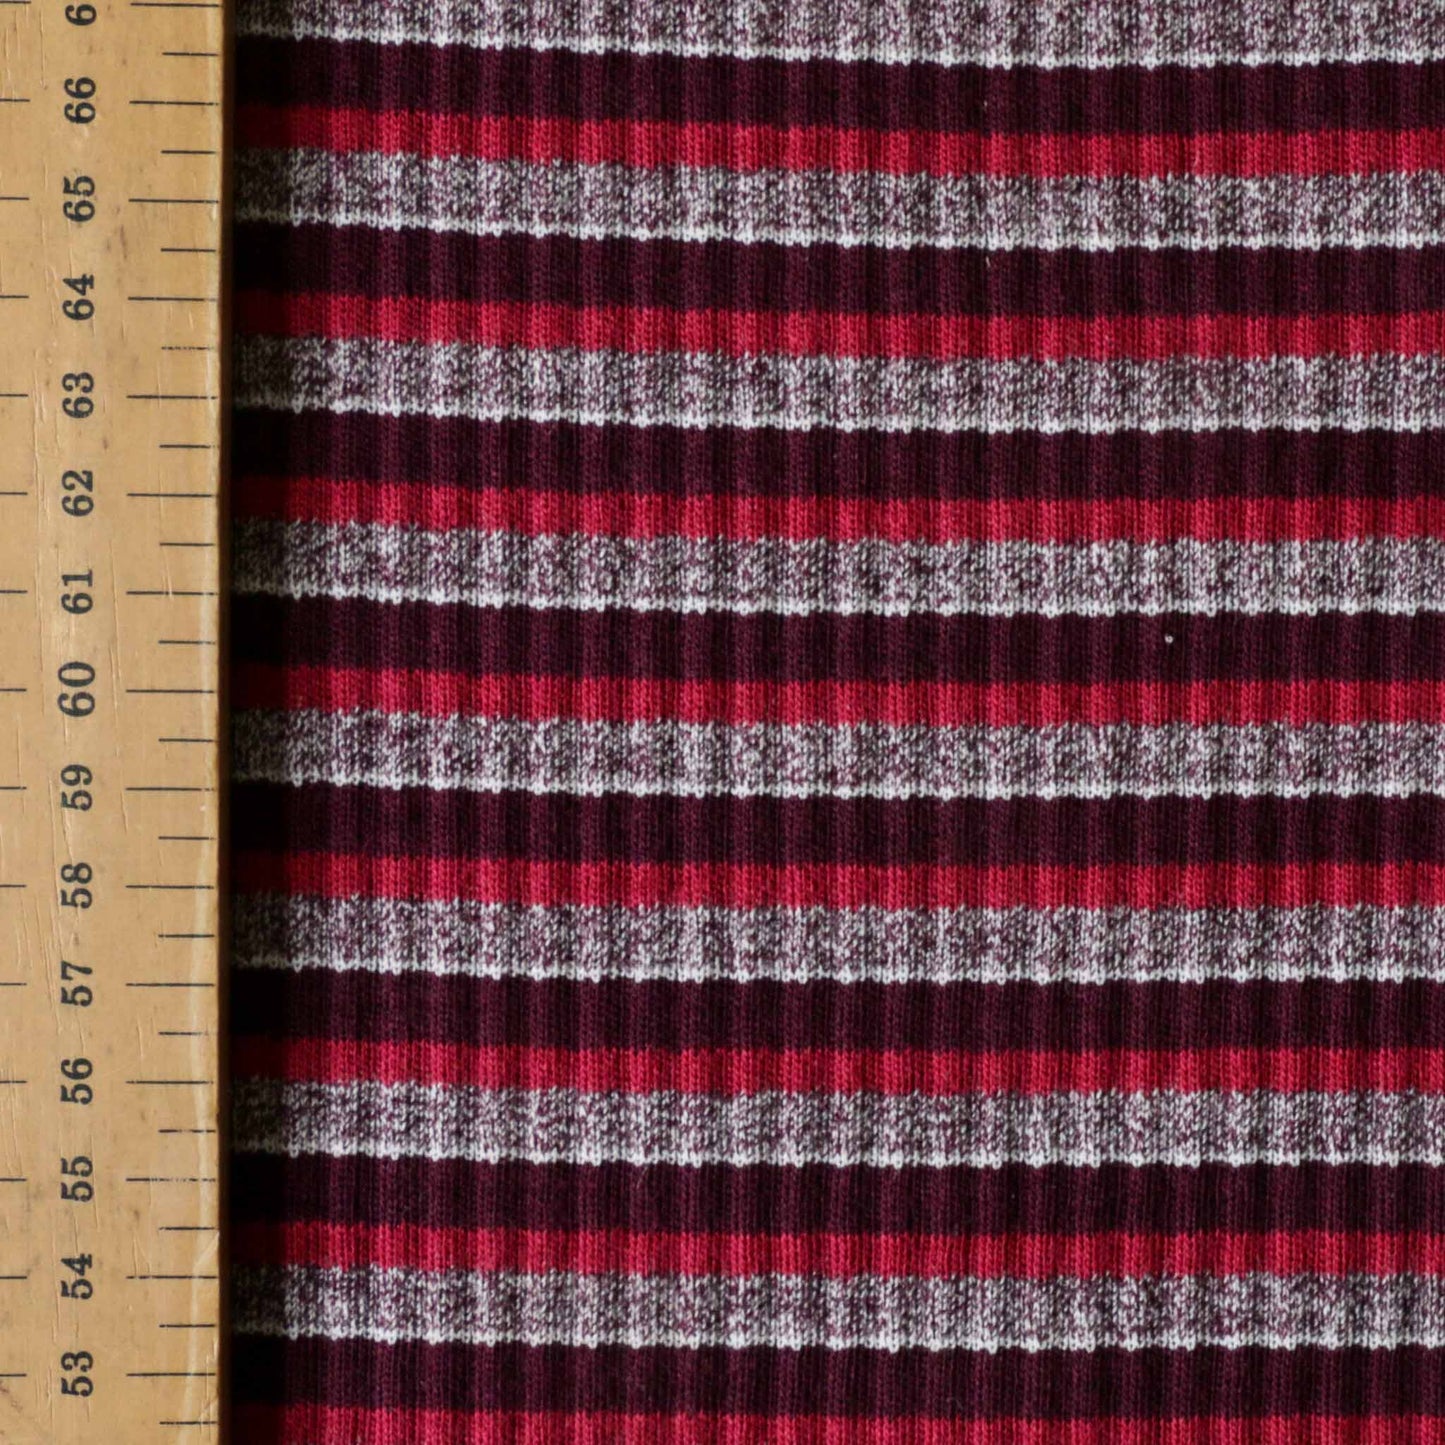 metre rib jersey knit dressmaking fabric with tubular stripe pattern in maroon and pink 